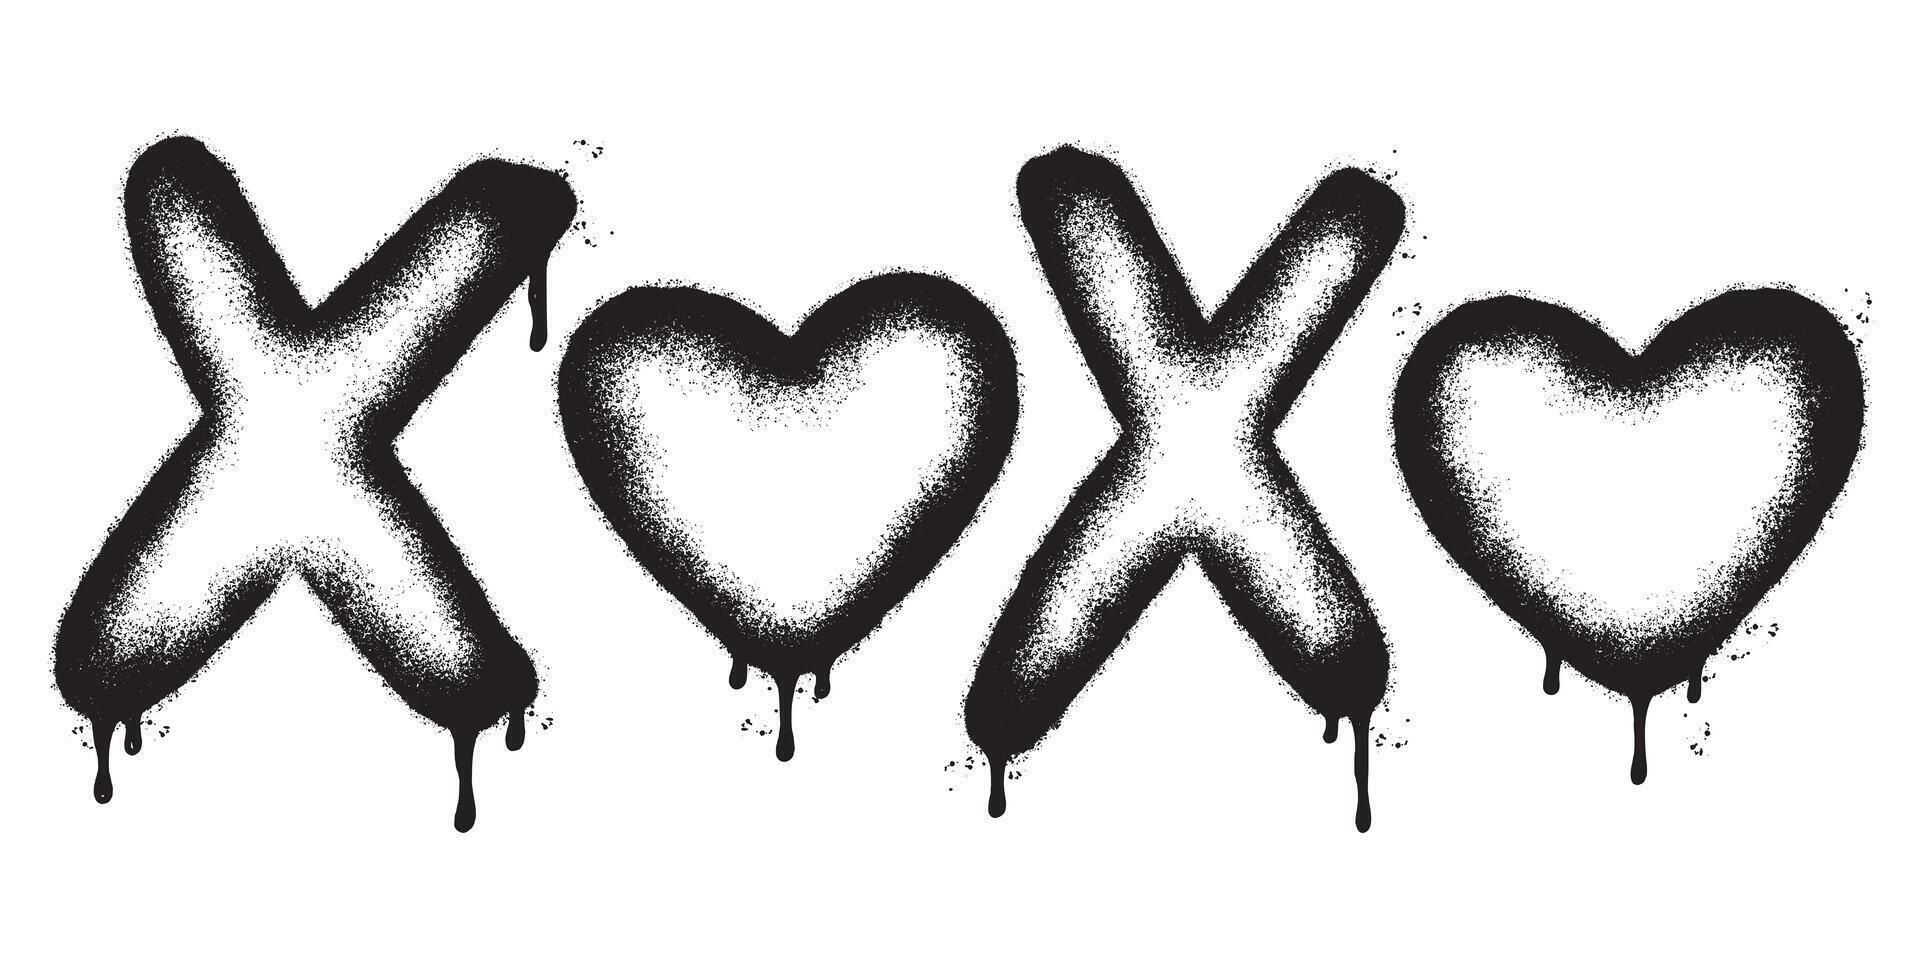 Spray Painted Graffiti xoxo Word Sprayed isolated with a white background. vector